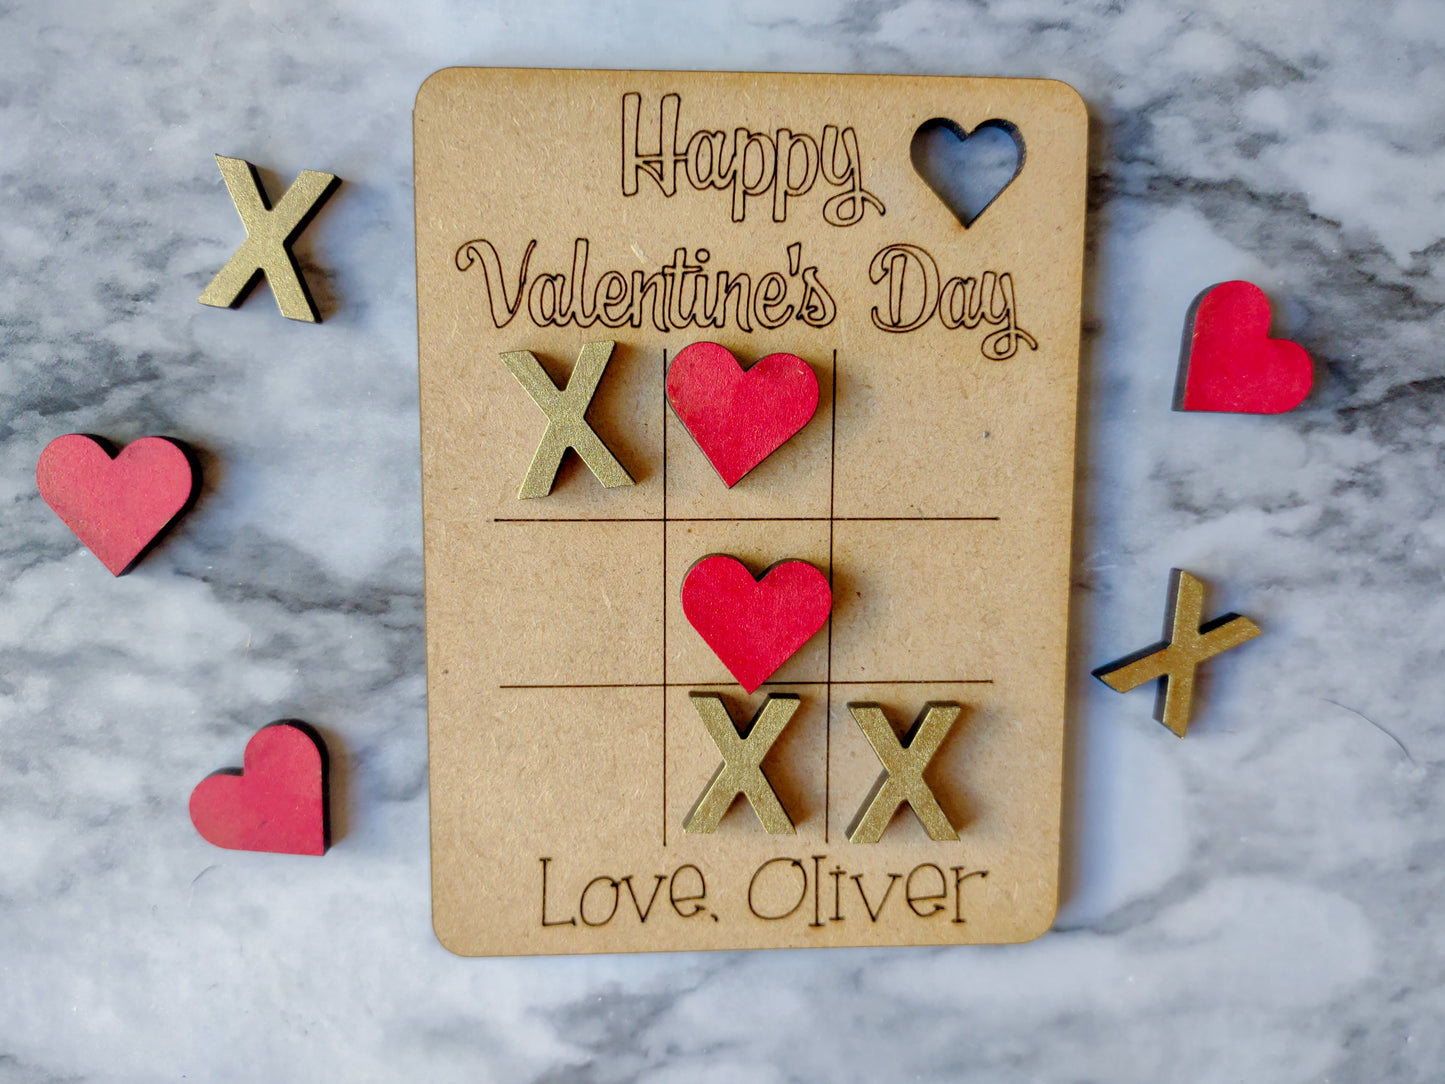 Tic Tac Toe Valentine's Day Cards